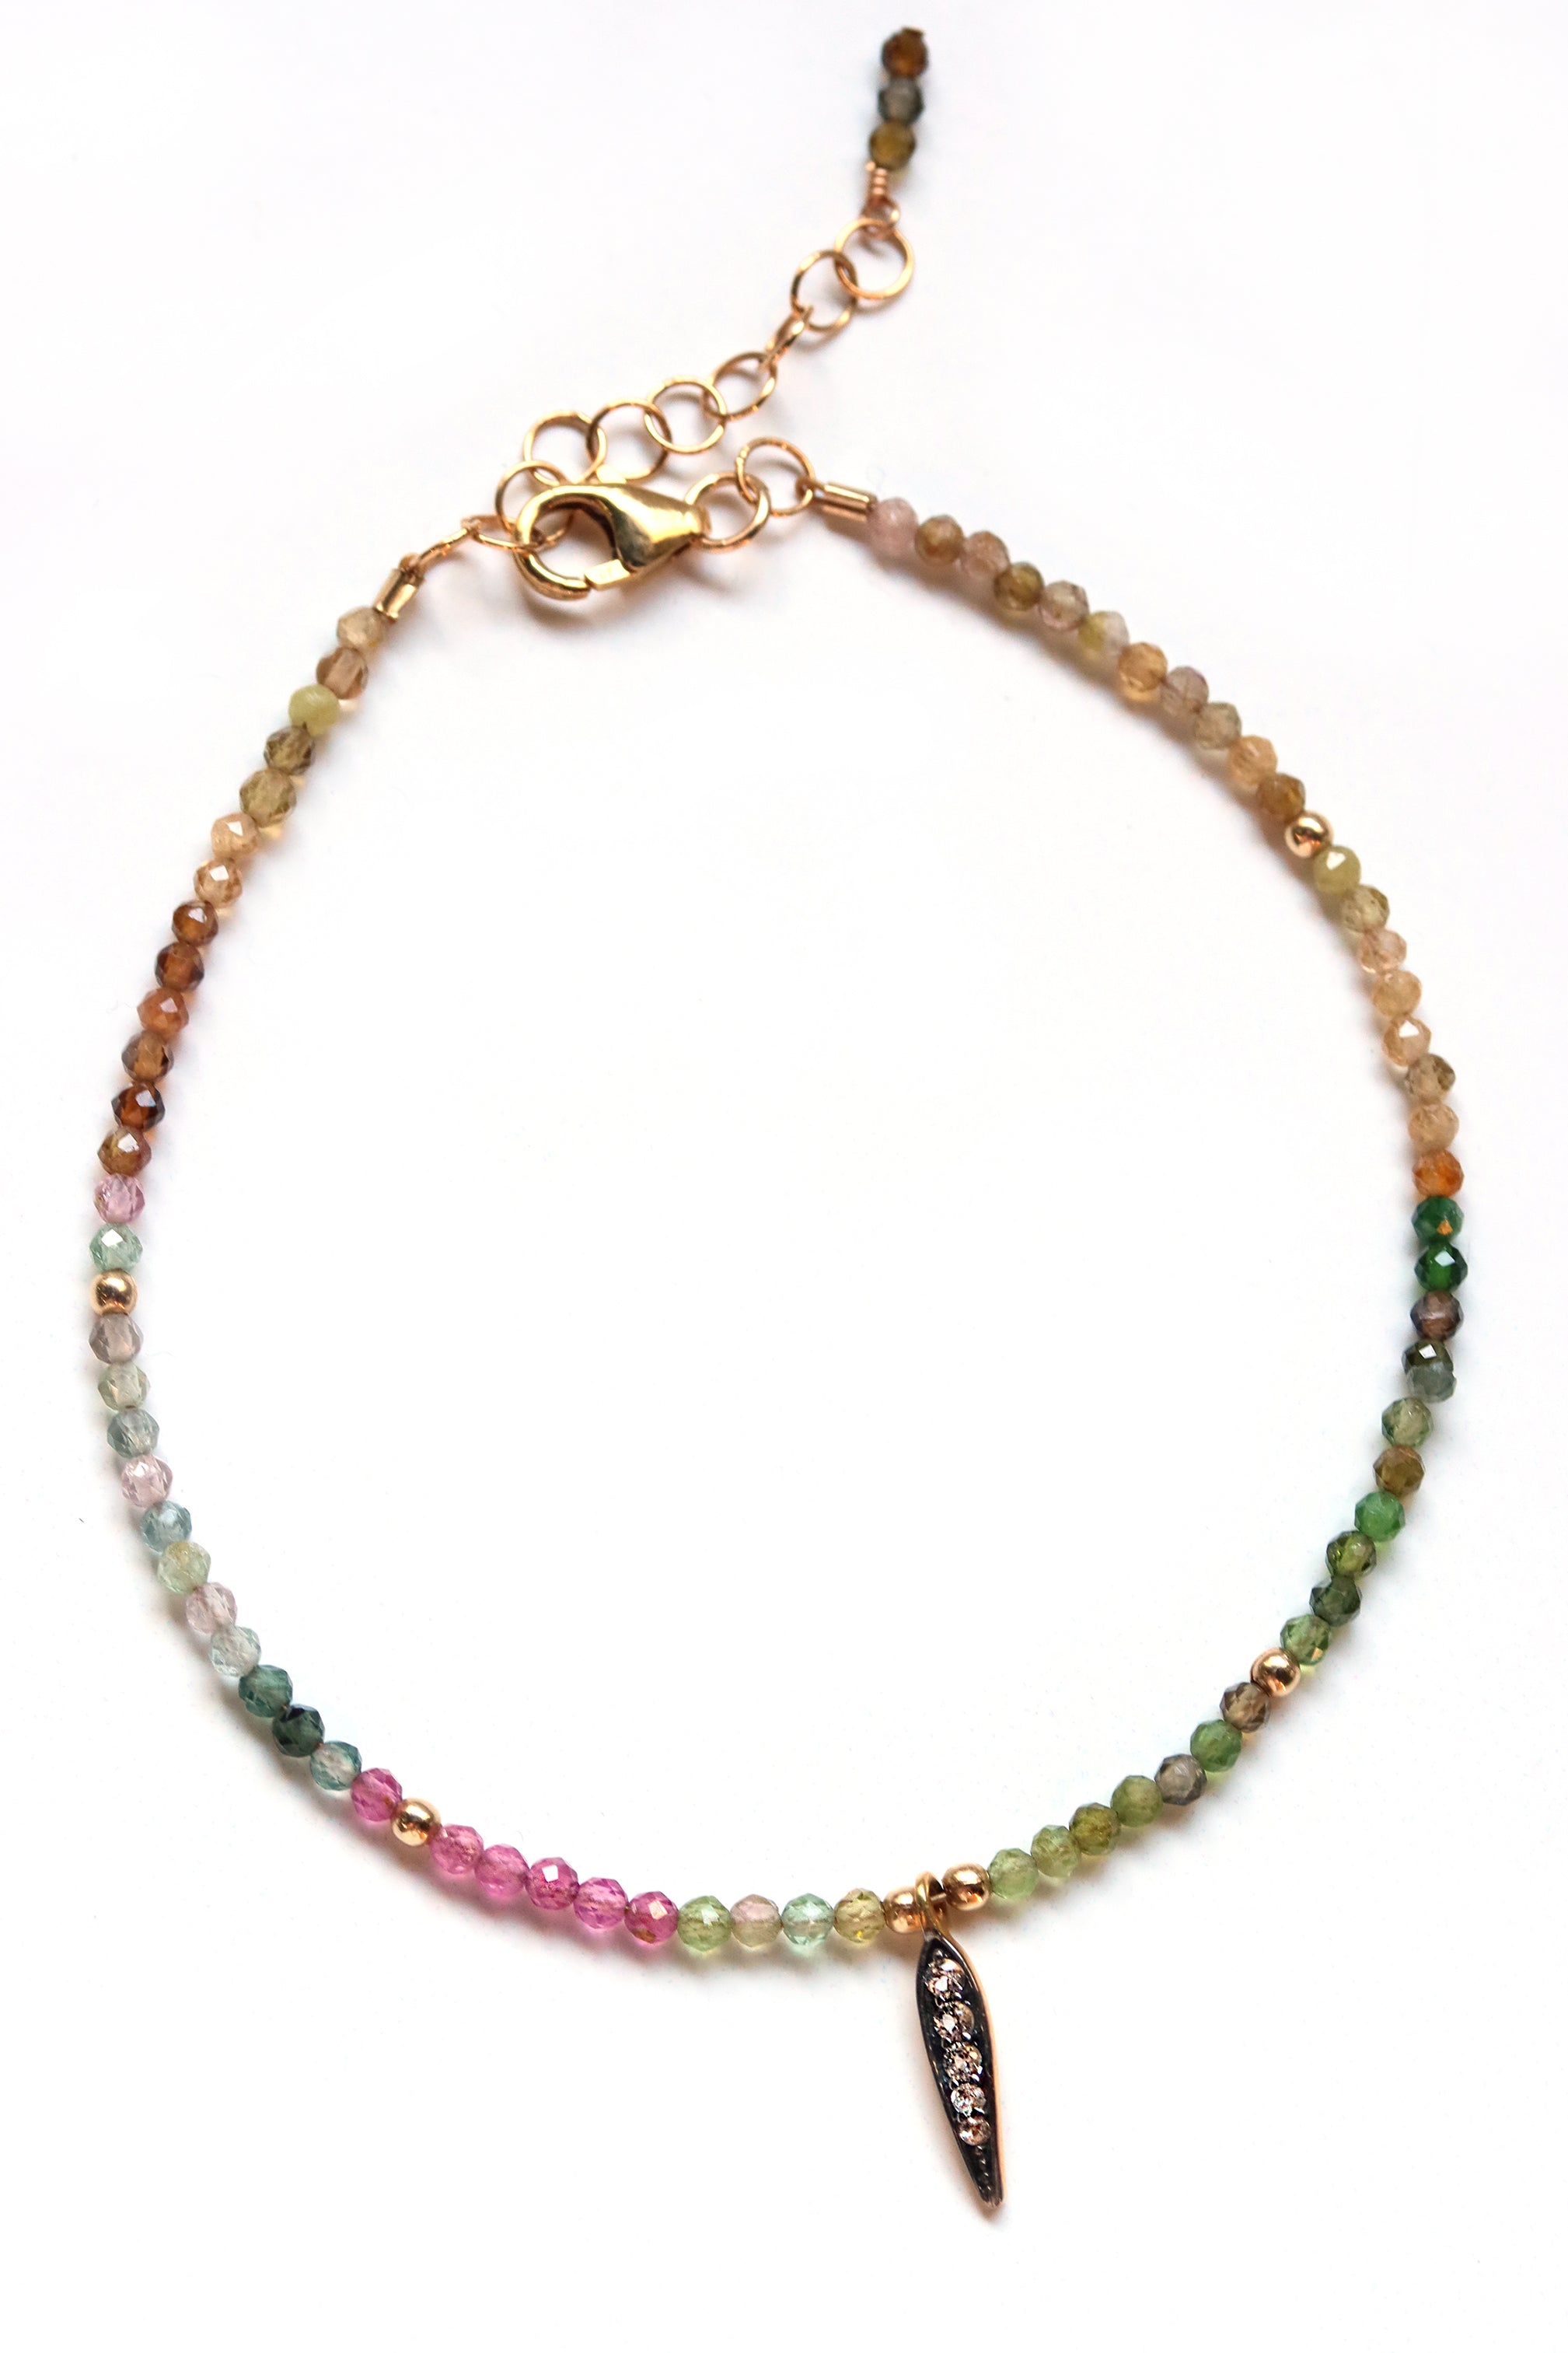 Rainbow Tourmaline Bracelet With Natural Stone Healing Bead Bracelets  Wholesale Hand Row Multi Color Braces For Womens Gift Jewelry JoursNeige  Y200730 From Shanye08, $26.25 | DHgate.Com